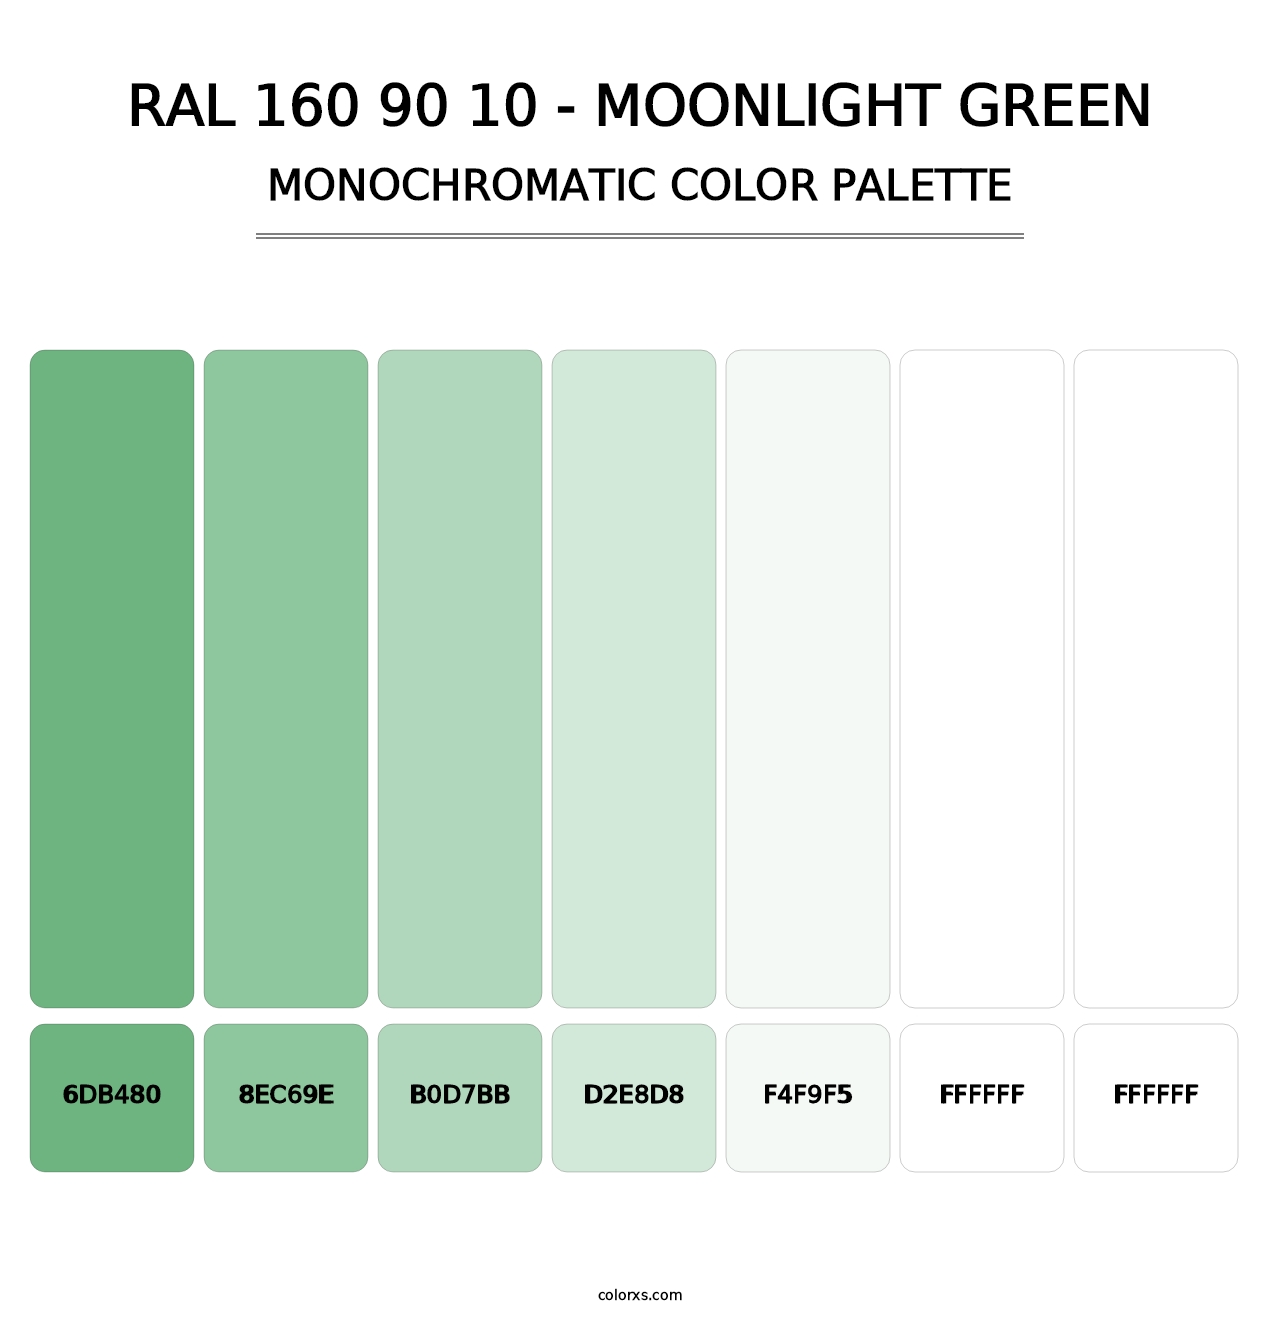 RAL 160 90 10 - Moonlight Green - Monochromatic Color Palette